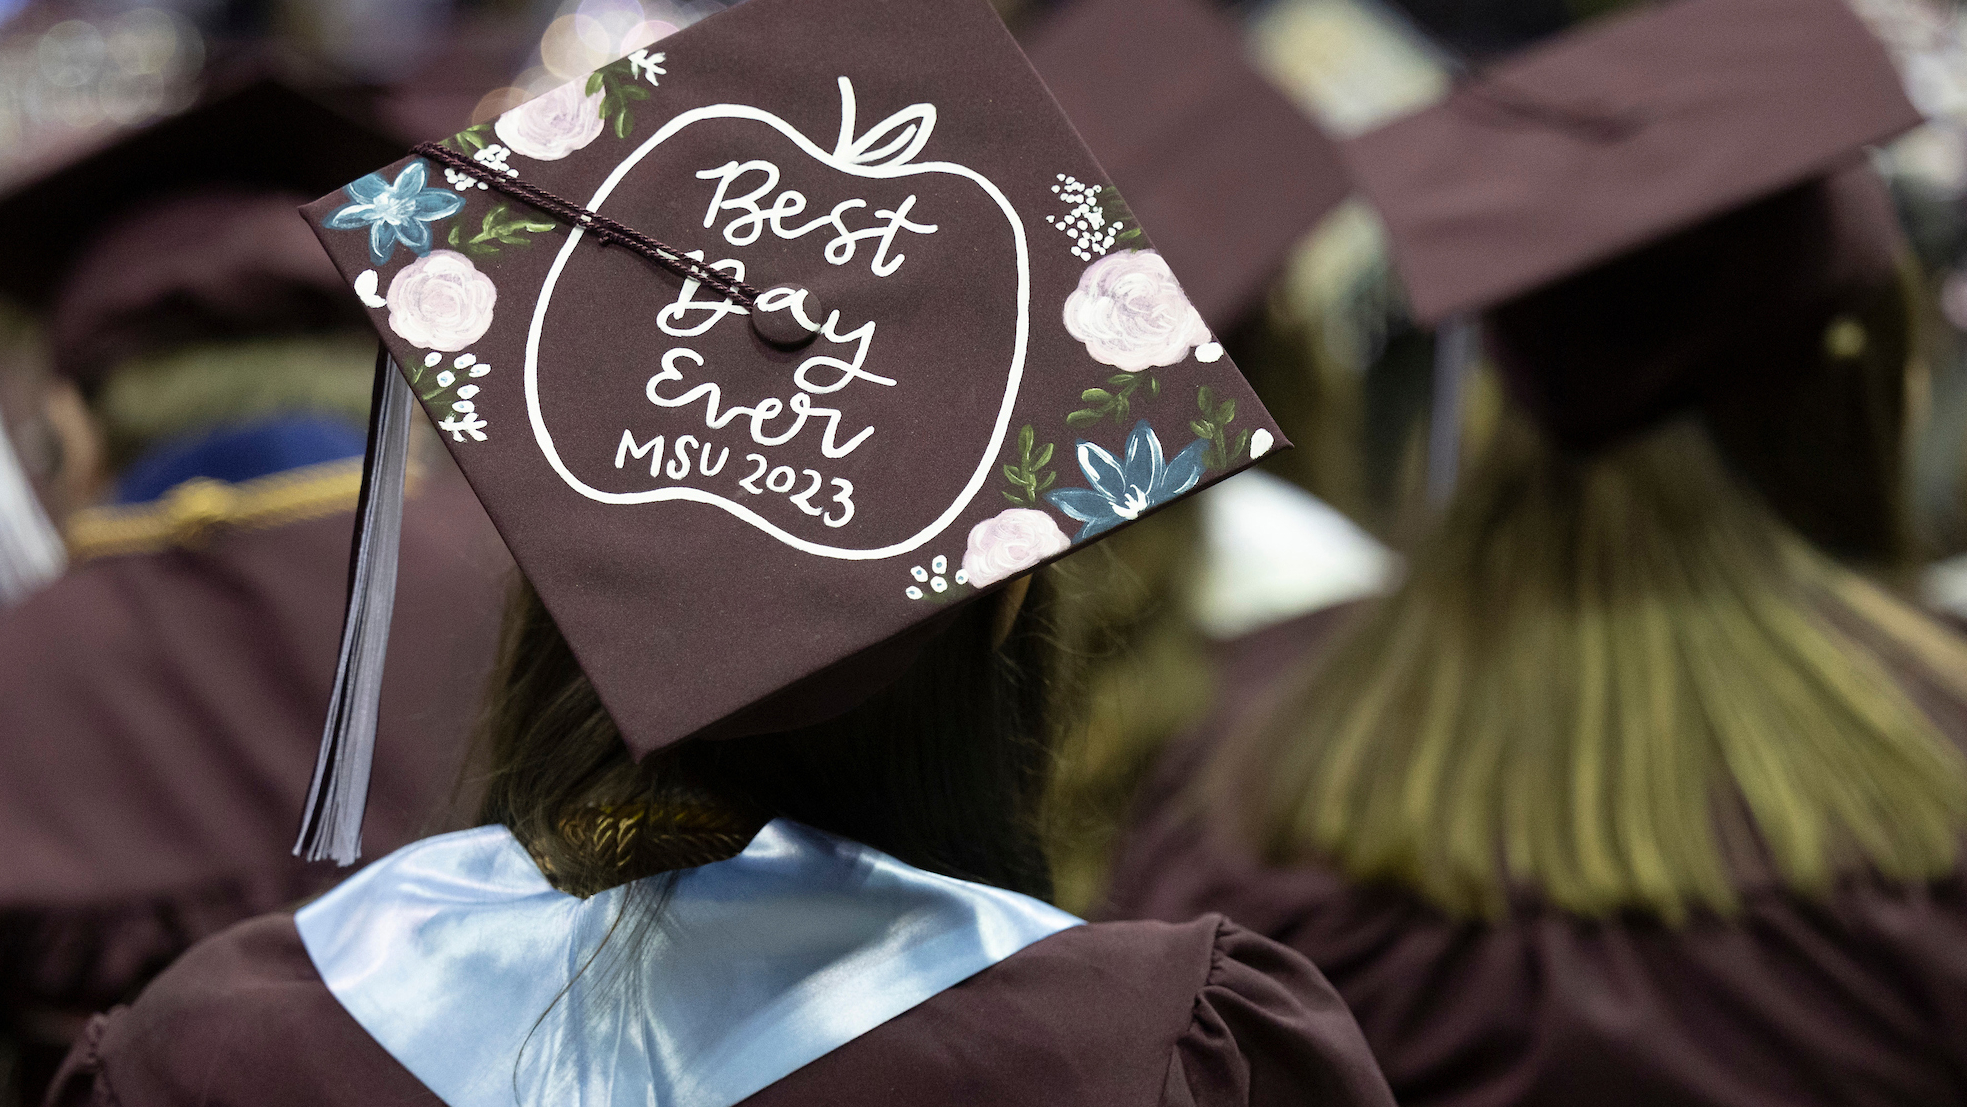 A graduate's mortarboard with the words "Best Day Ever MSU 2023" on it.